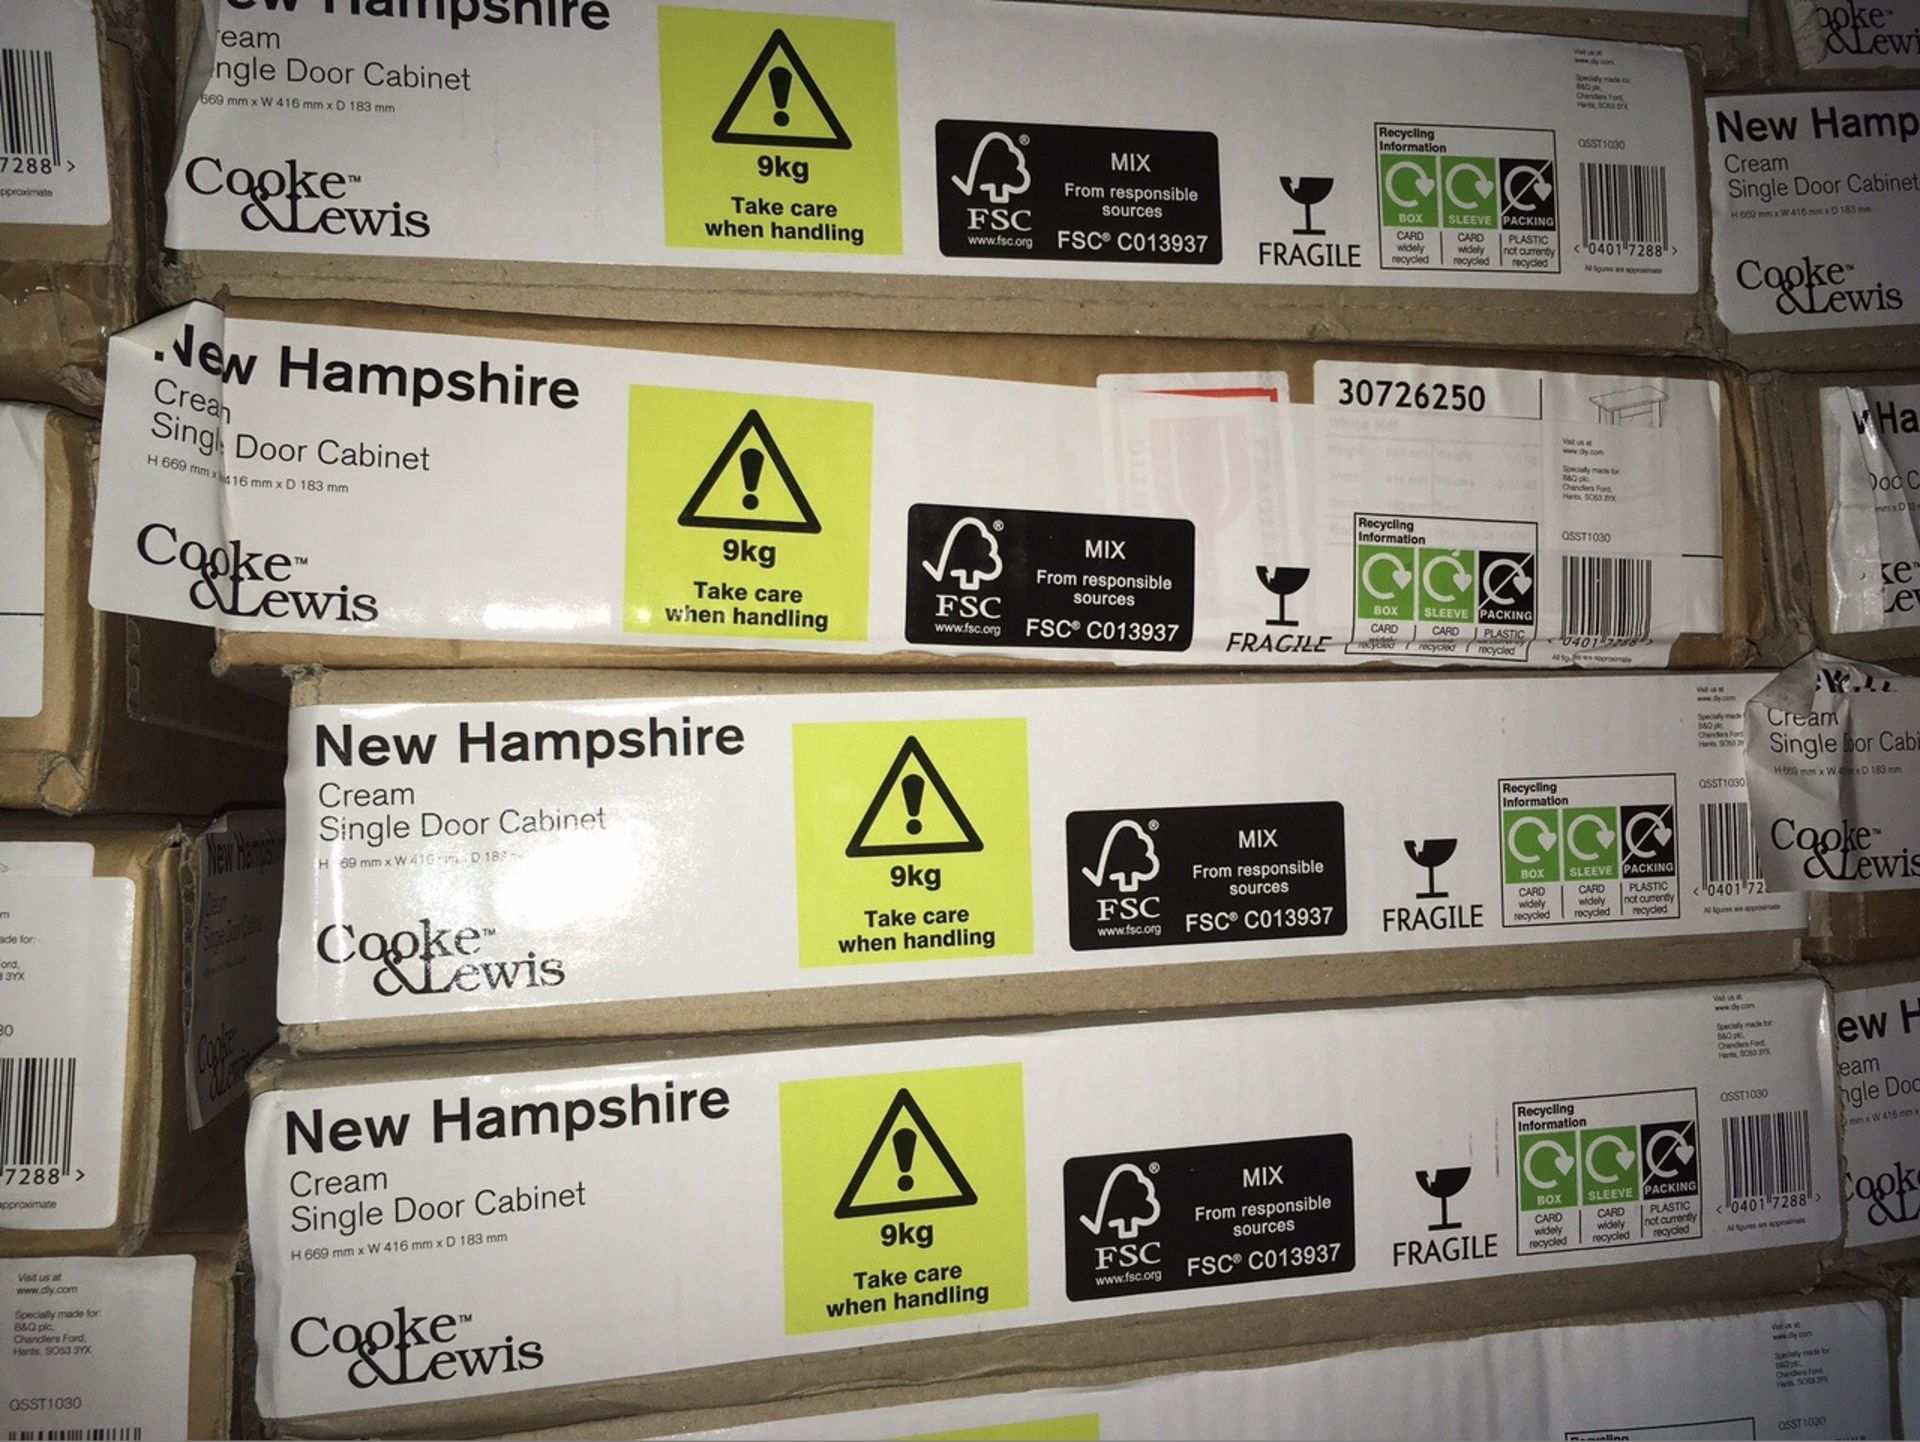 1 x Cooke & Lewis Cream New Hampshire Bathroom Cabinet (Brand New & Boxed) - Image 2 of 2